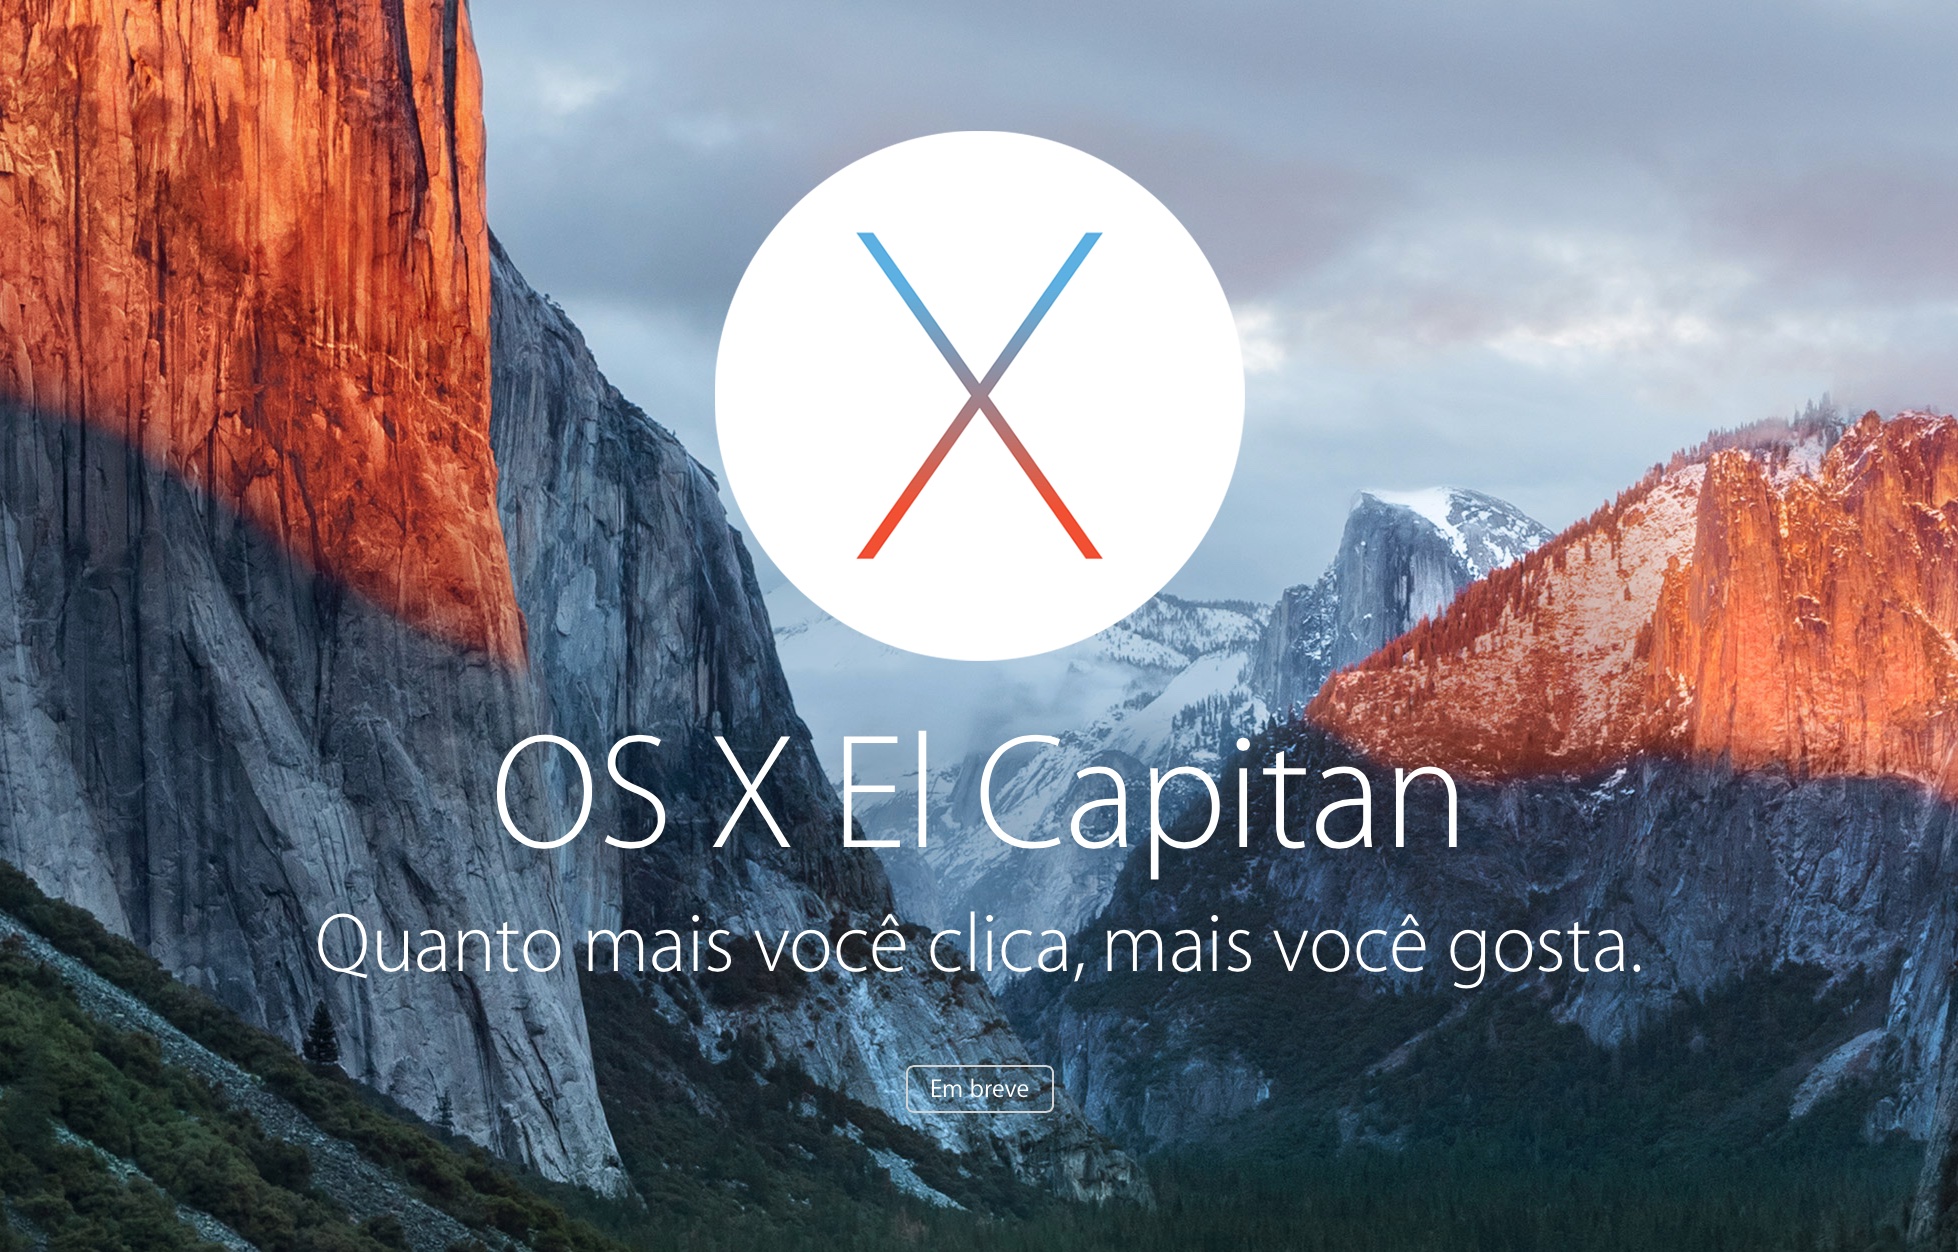 OS X El Capitan 10.11 hasn't even been released yet, but Apple has already started testing 10.11.1 [atualizado 2x: Emojis]